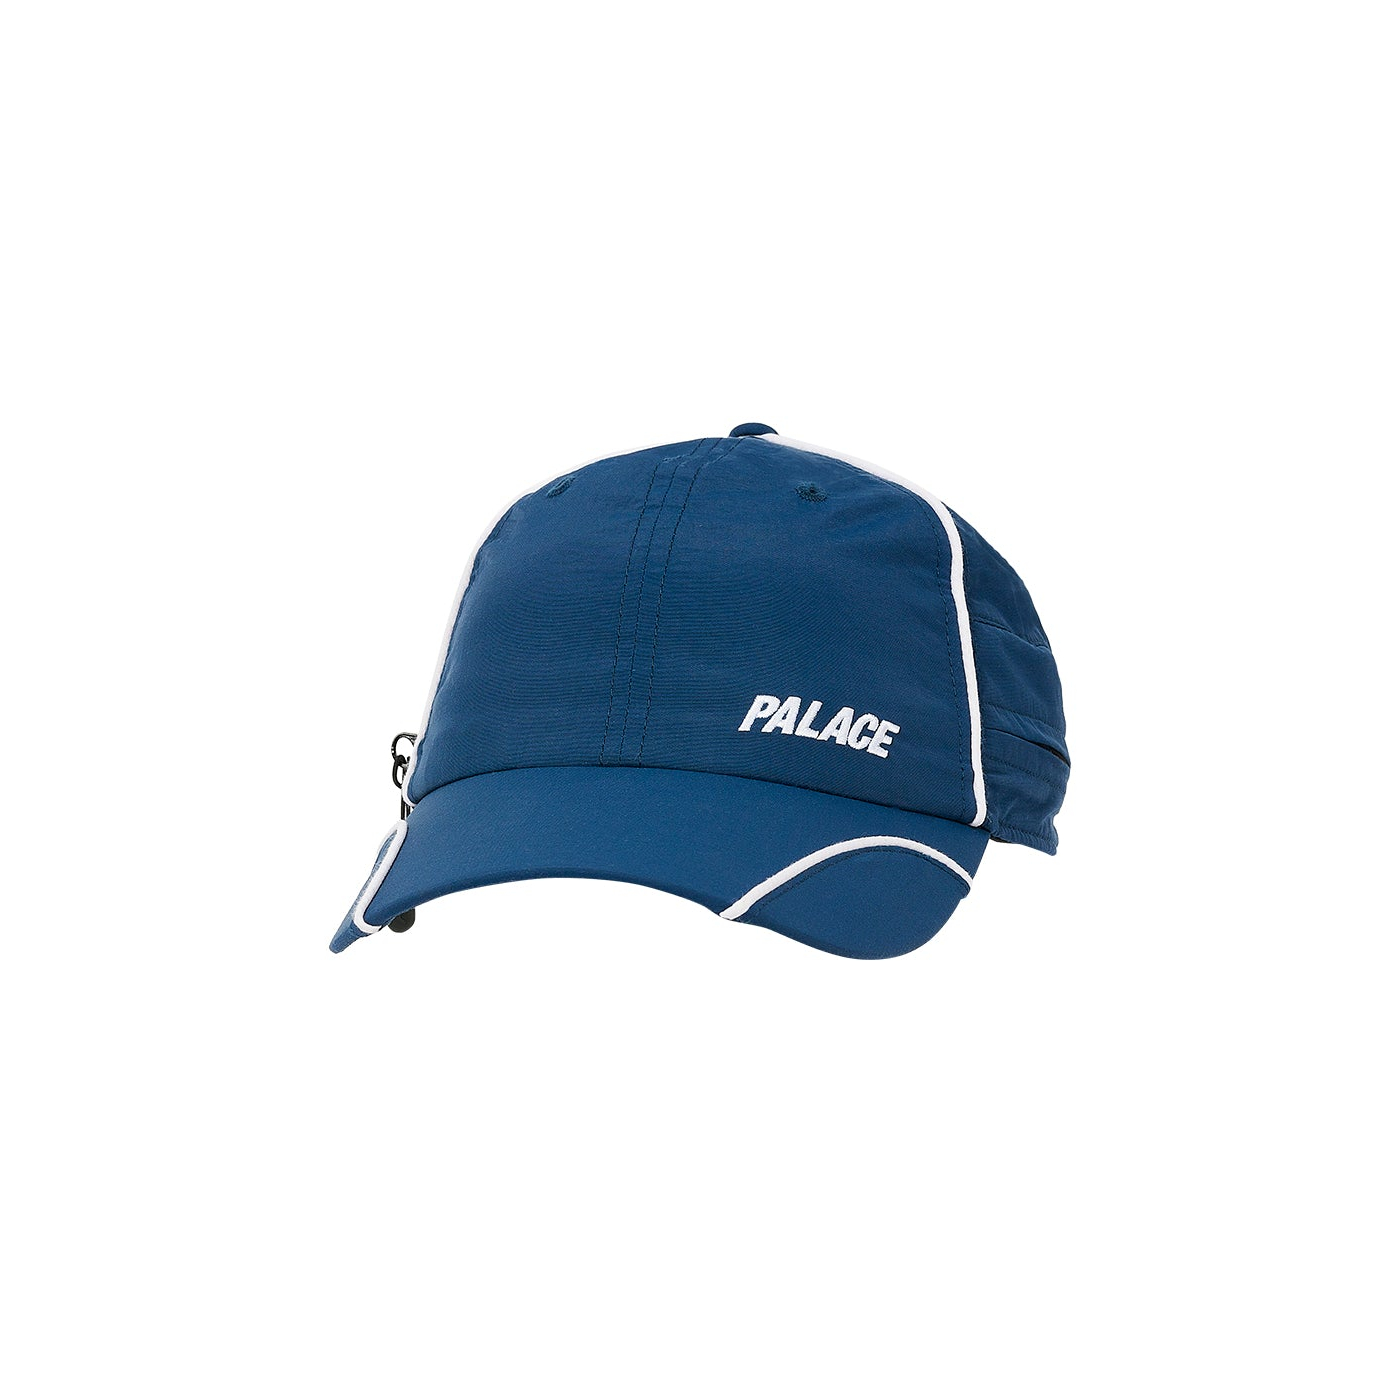 Thumbnail FONT ZIP SHELL NECK SAVER 6-PANEL NAVY one color